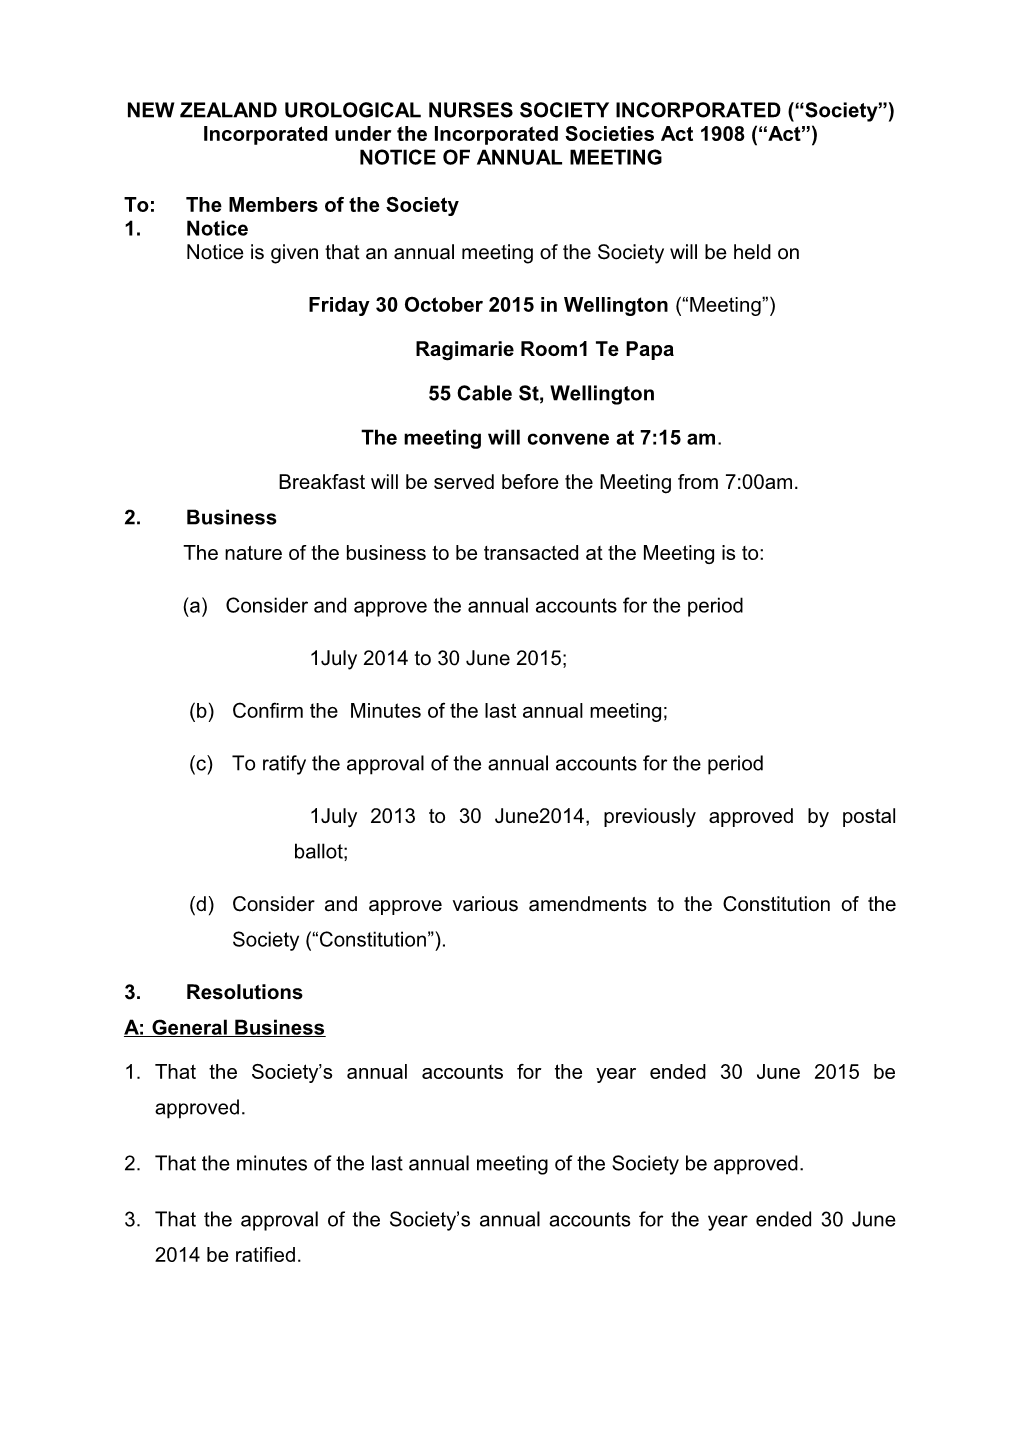 Notice of Meeting (Explanatory) - WRMK Comments Marked